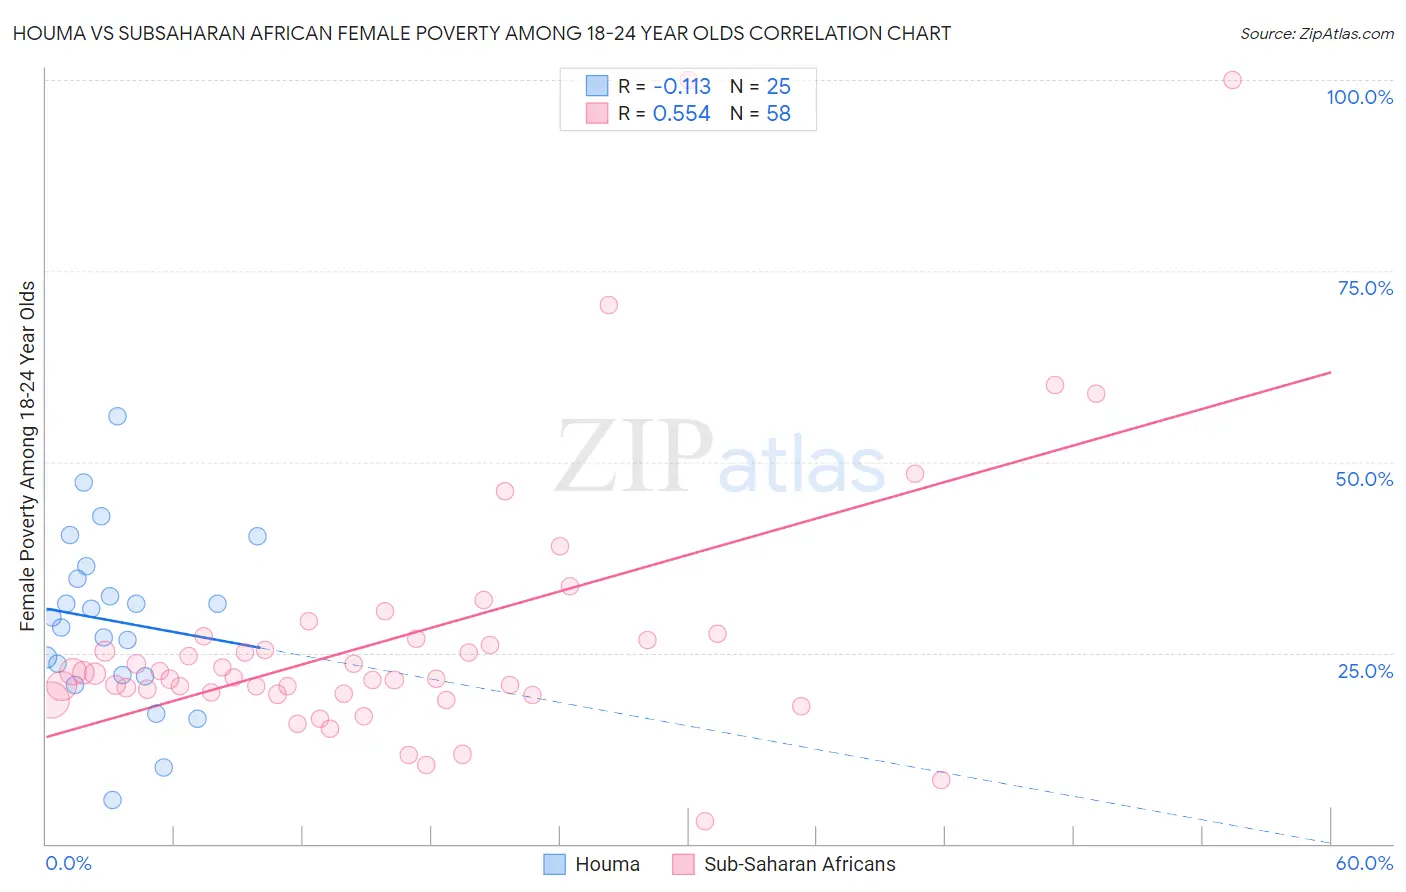 Houma vs Subsaharan African Female Poverty Among 18-24 Year Olds